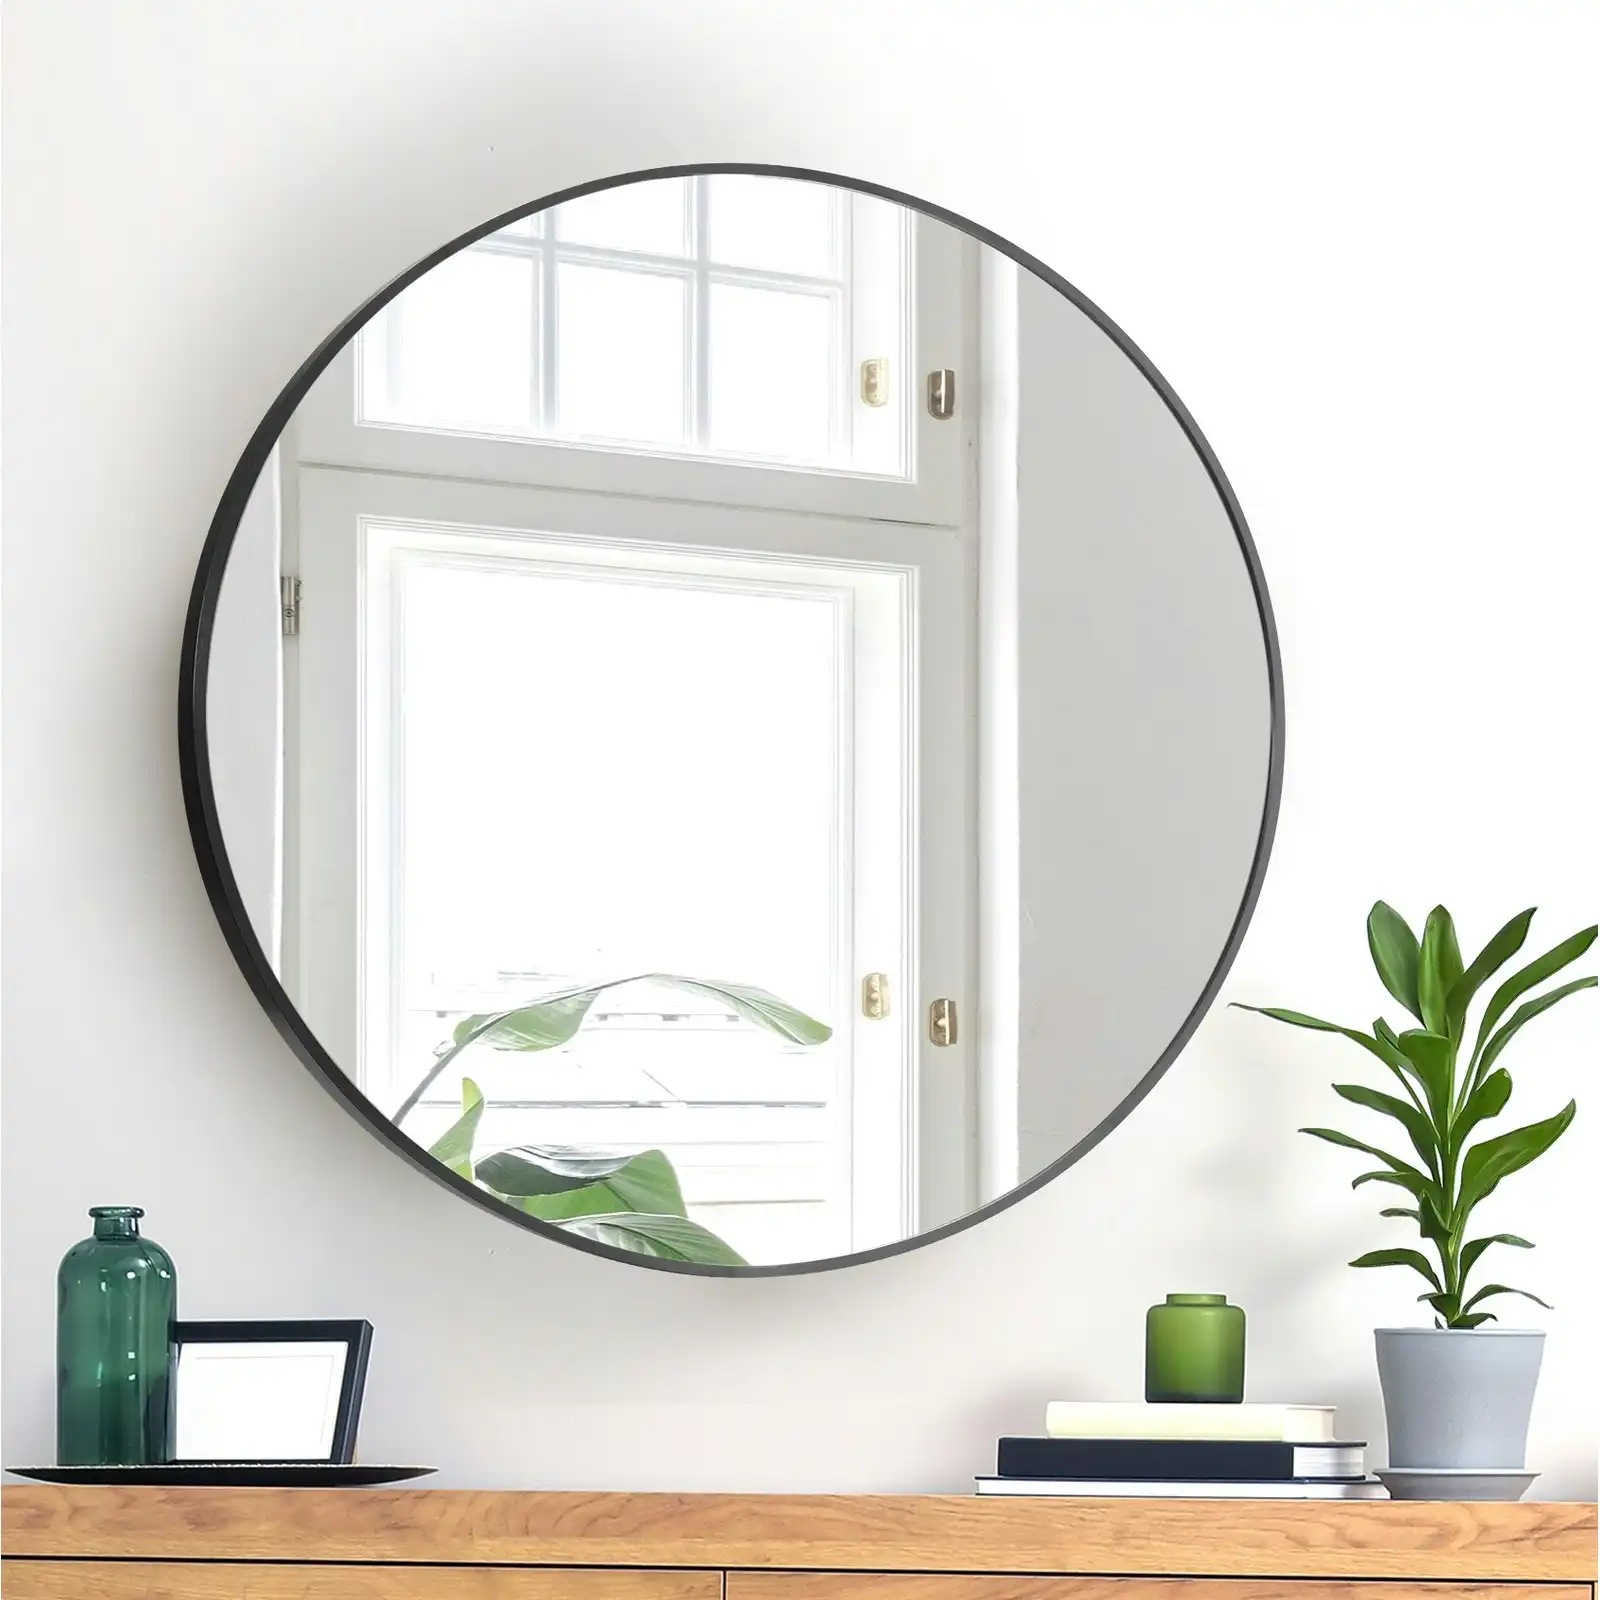 Oikiture 60cm Wall Mirrors Round Makeup Mirror Home Decor Black Living Room